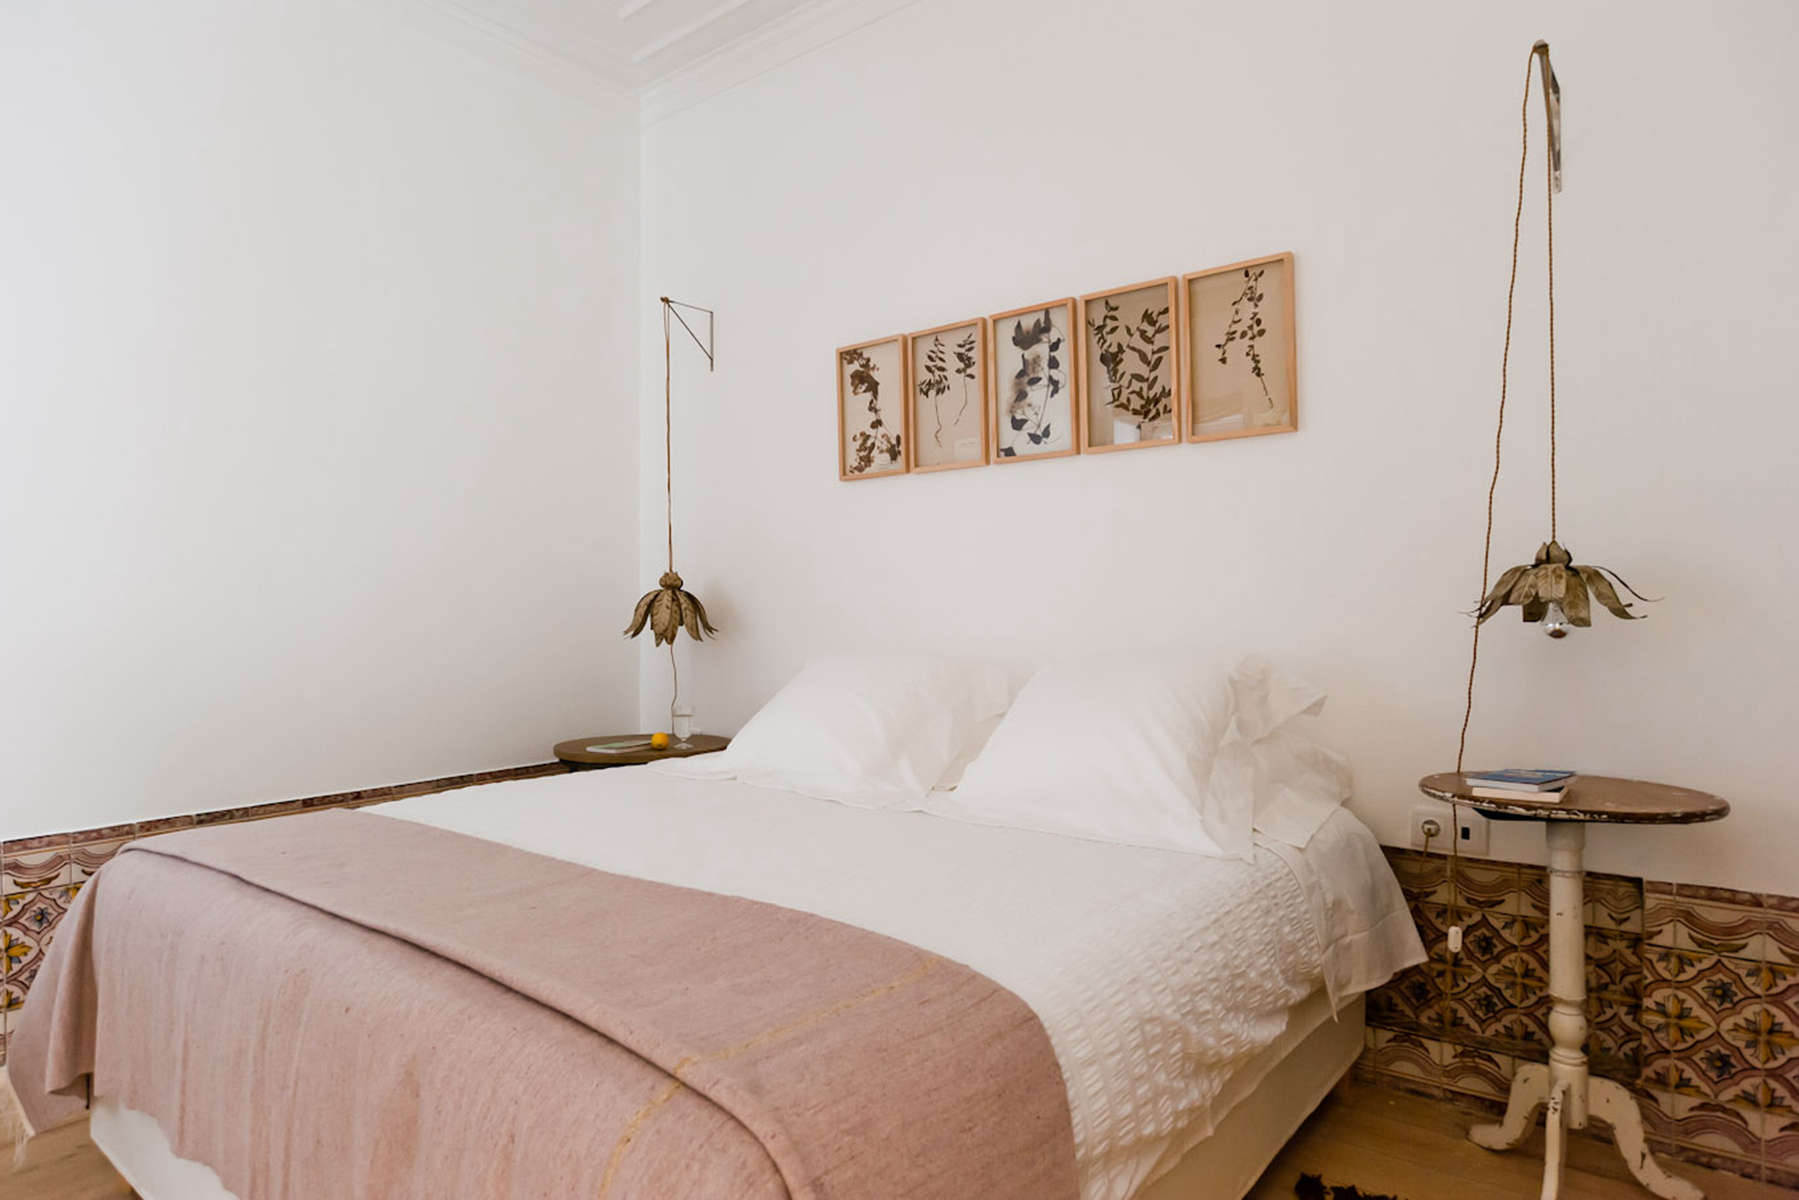 Steal This Look: A Portuguese Bedroom with Vintage Charm